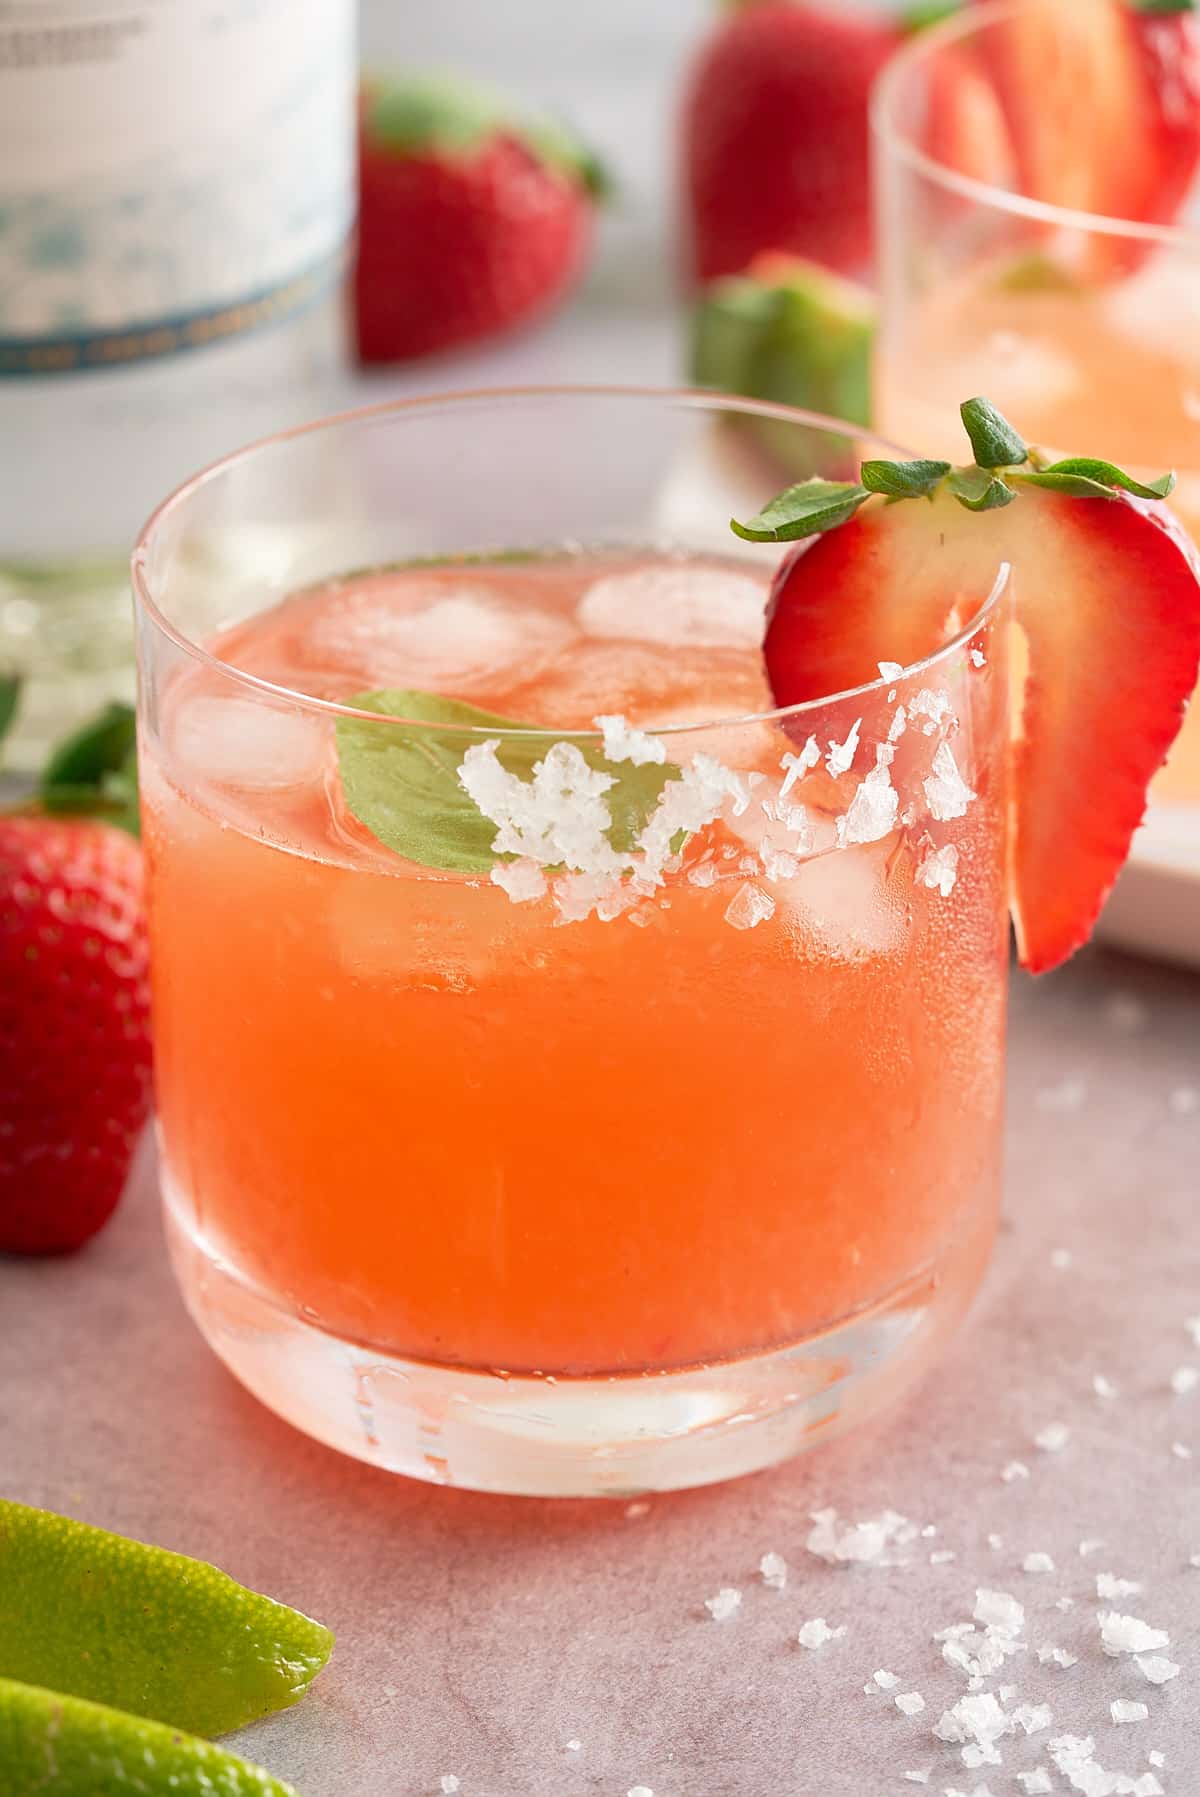 A glass filled with strawberry basil margarita served with ice and garnished with a slice of strawberry and a basil leaf.